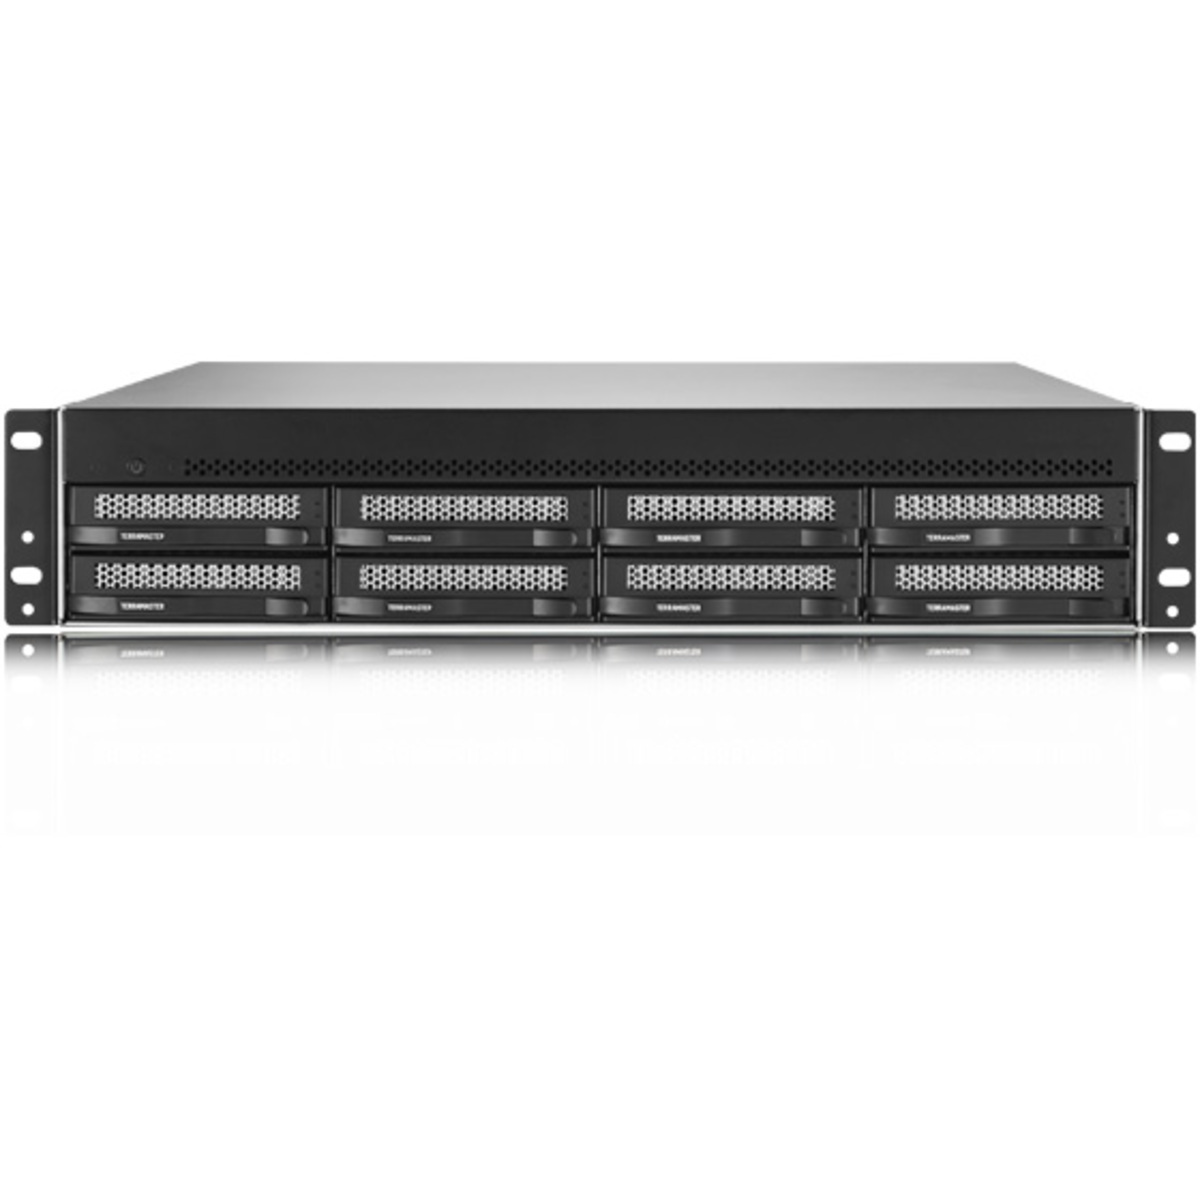 TerraMaster U8-450 4tb 8-Bay RackMount Multimedia / Power User / Business NAS - Network Attached Storage Device 8x500gb Samsung 870 EVO MZ-77E500BAM 2.5 560/530MB/s SATA 6Gb/s SSD CONSUMER Class Drives Installed - Burn-In Tested U8-450